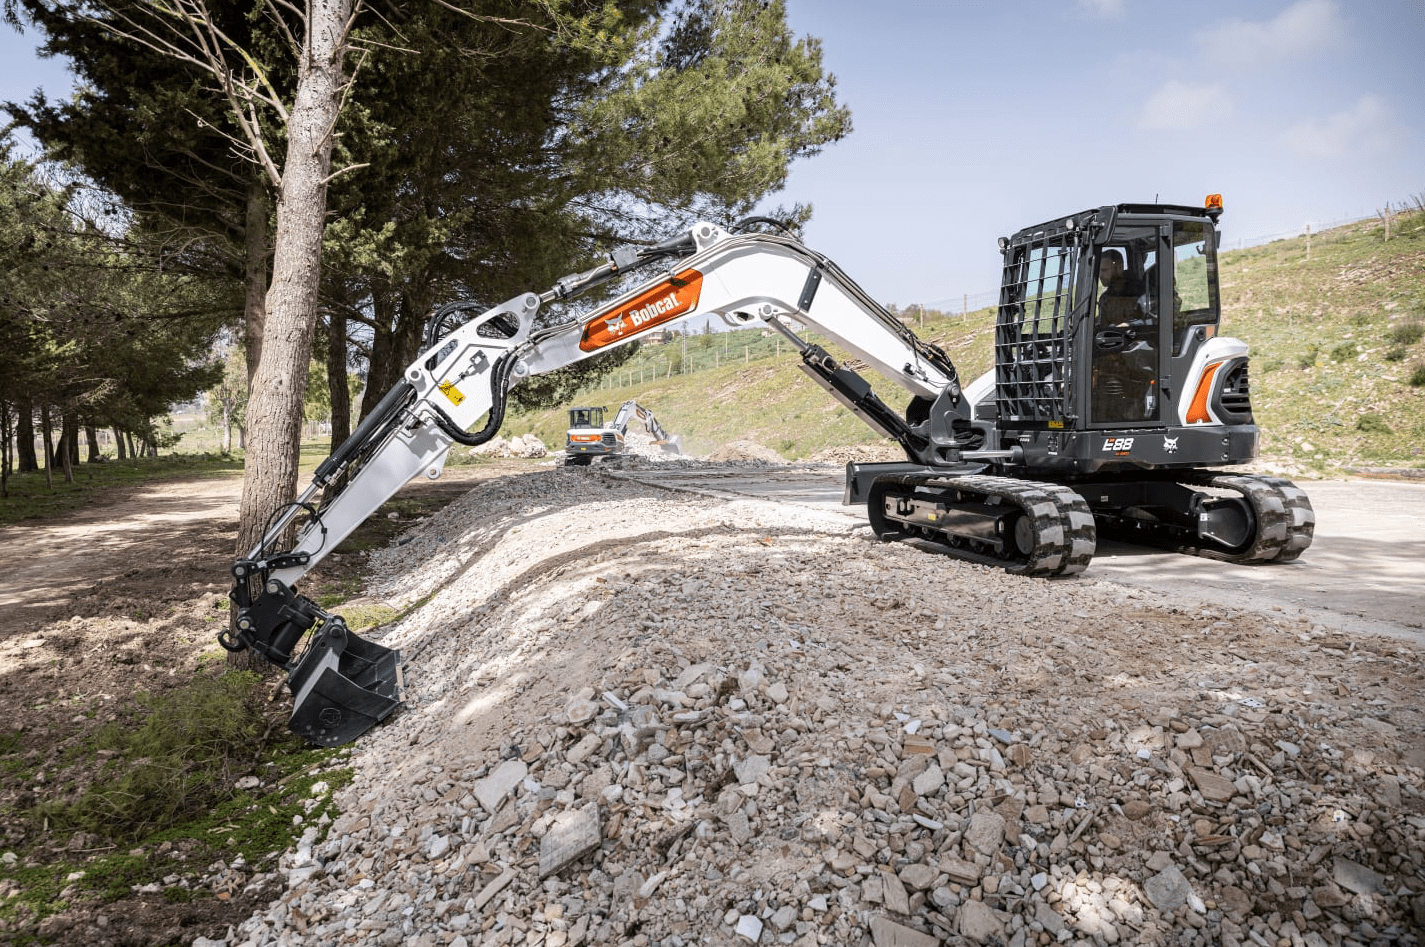 Browse Specs and more for the E85 Compact Excavator - White Star Machinery